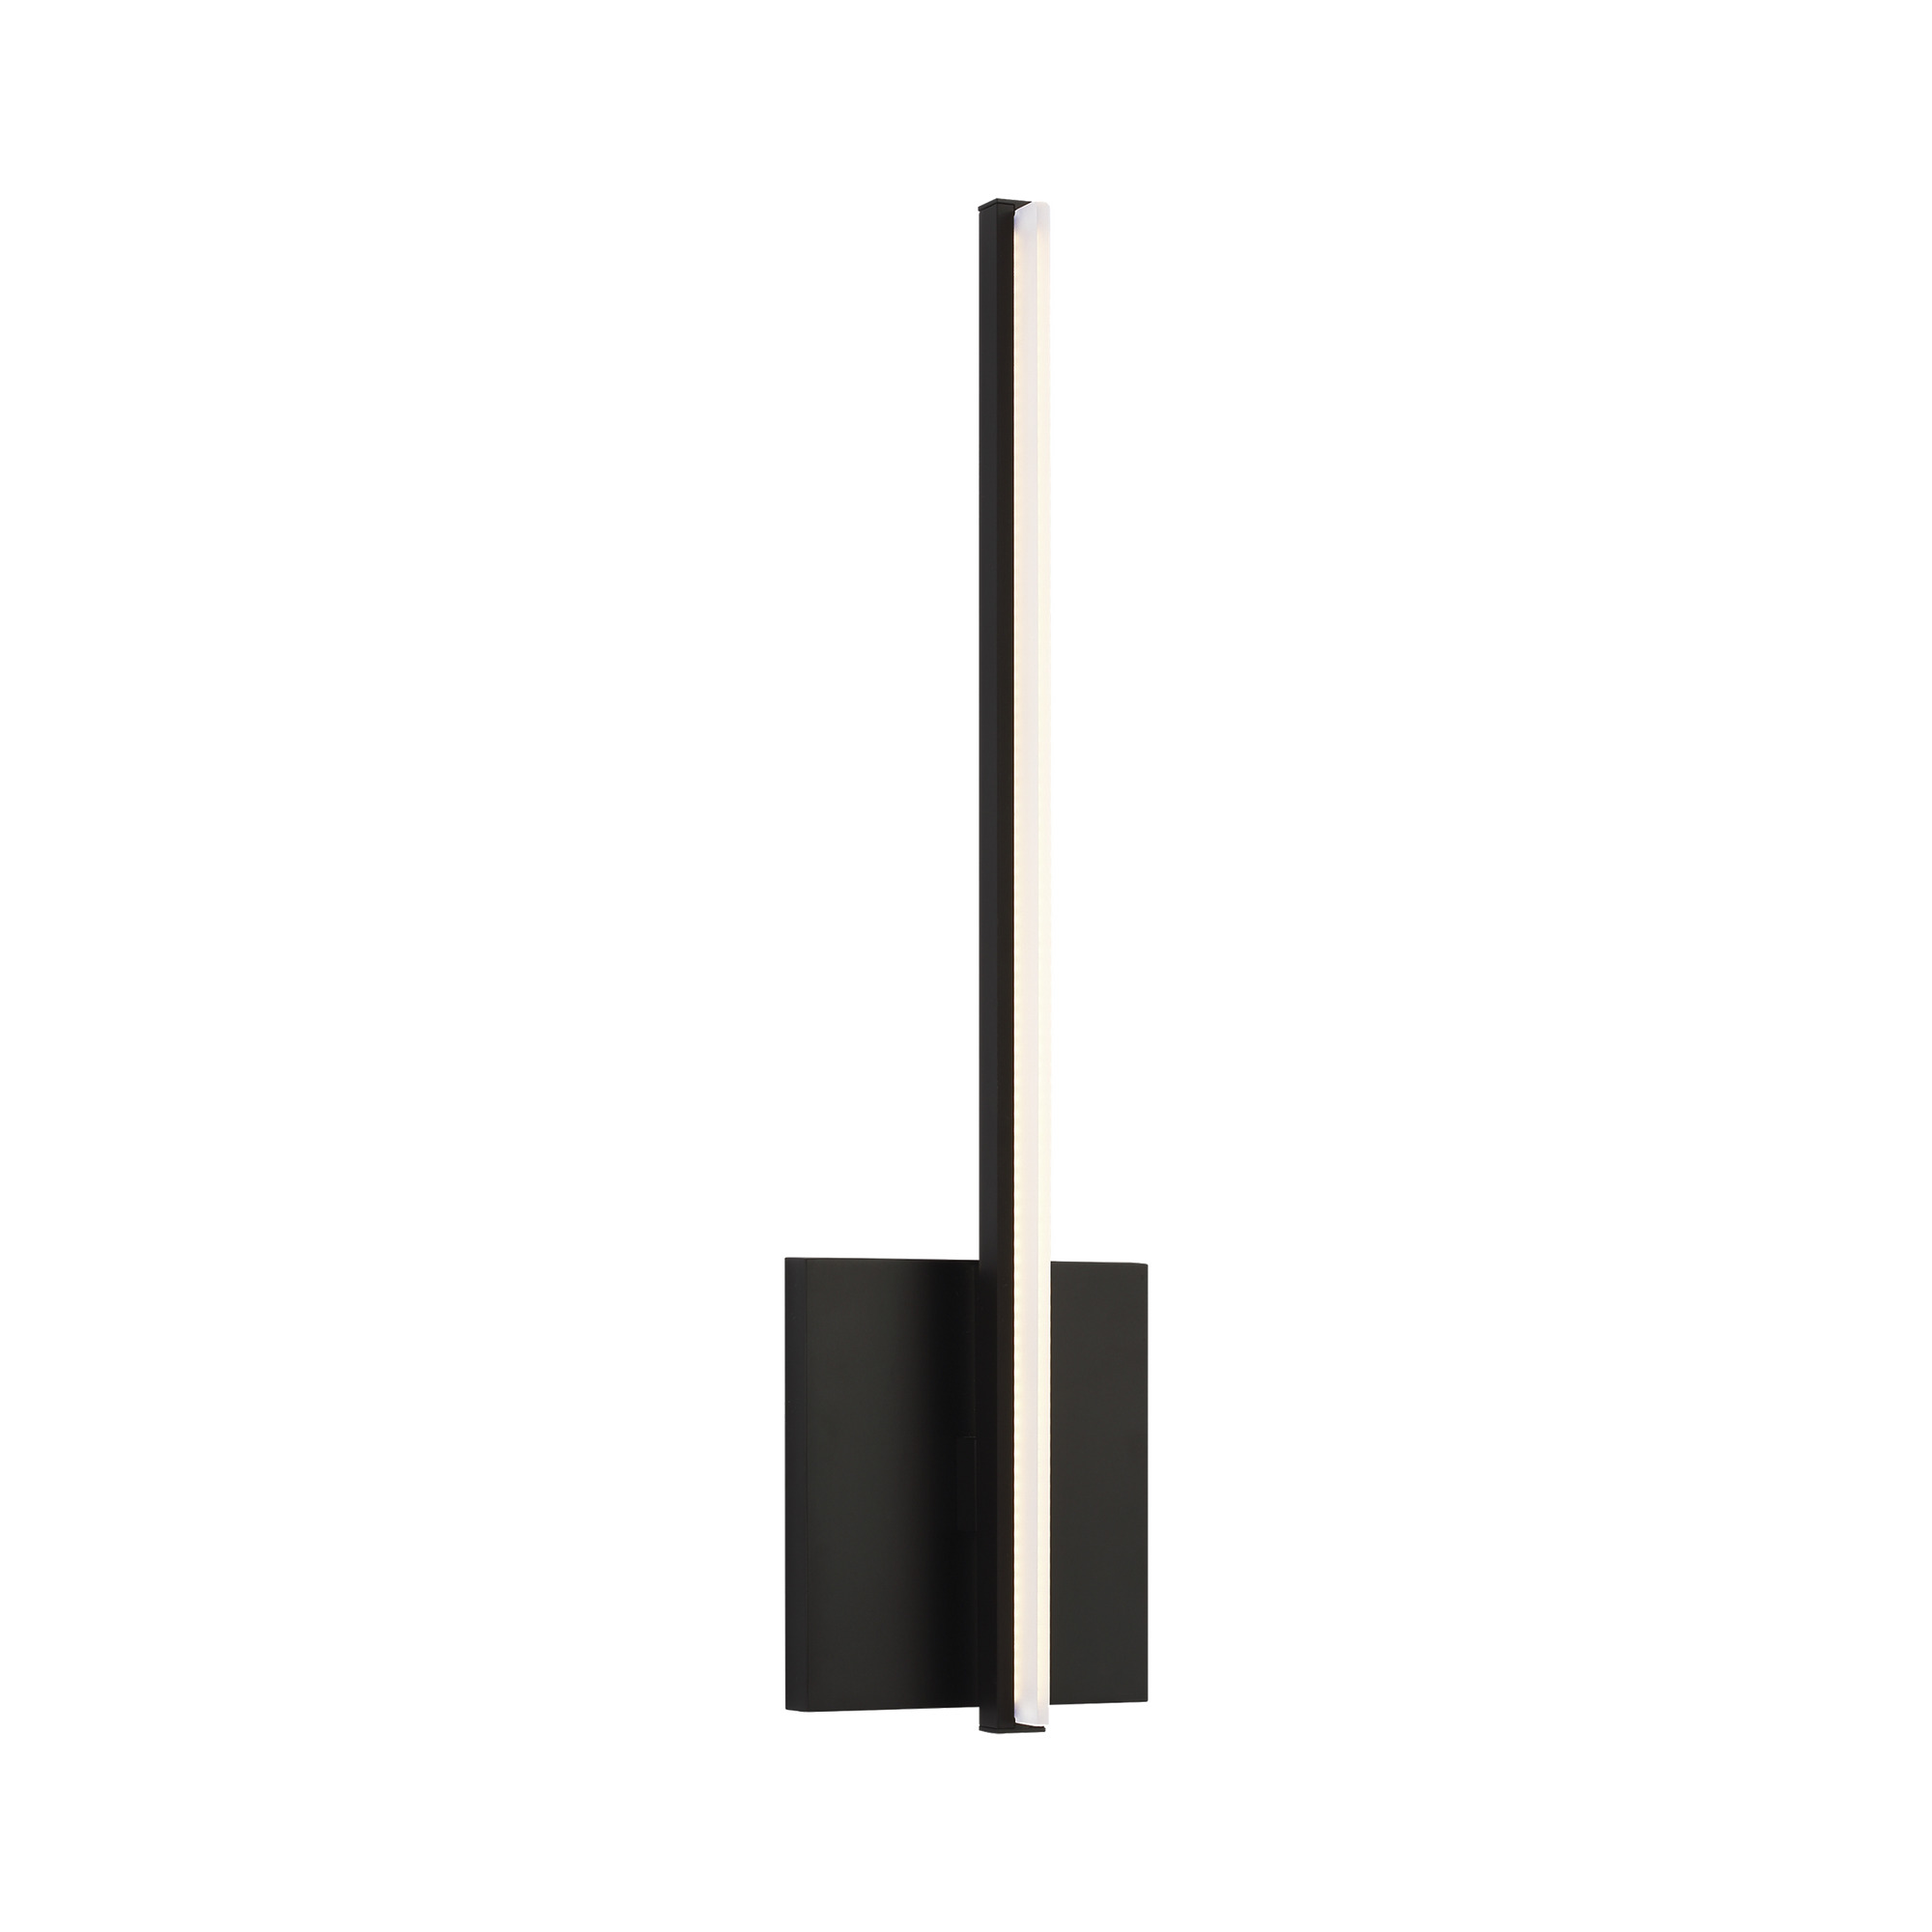 For the modern minimalist, the Edwards wall sconce is designed for simplicity.